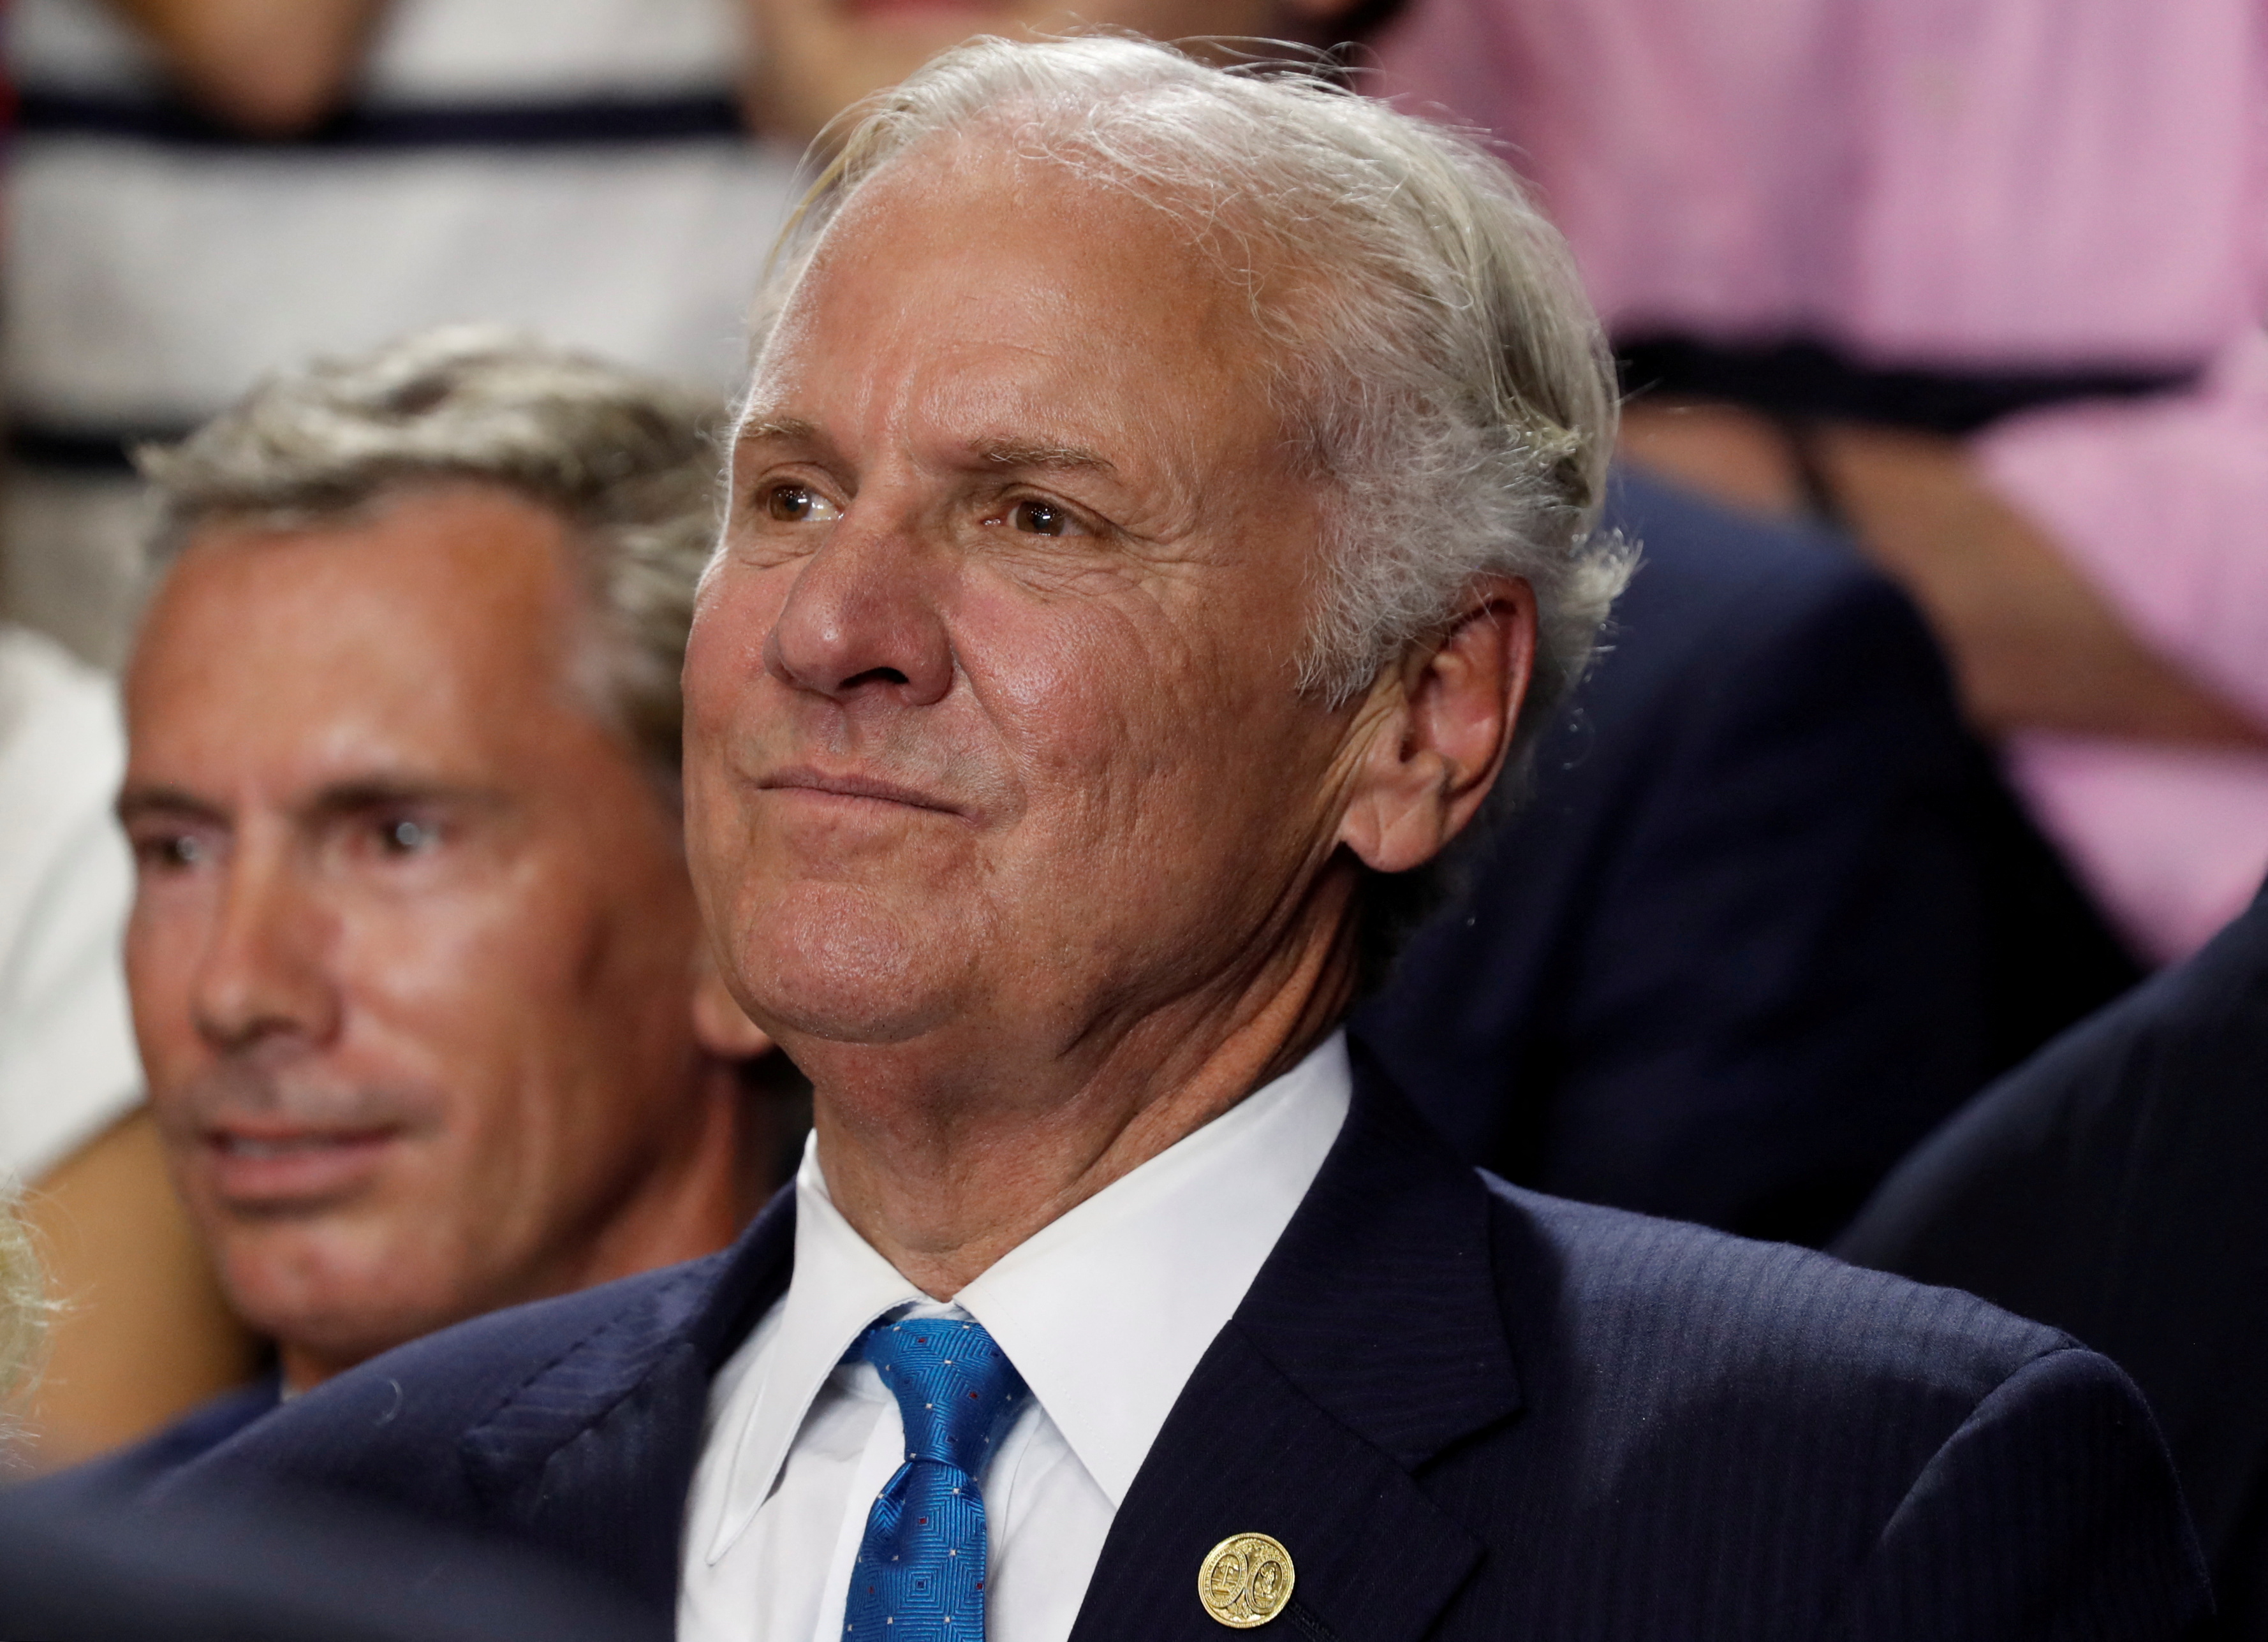 South Carolina Governor Henry McMaster looks on at a rally in Columbia